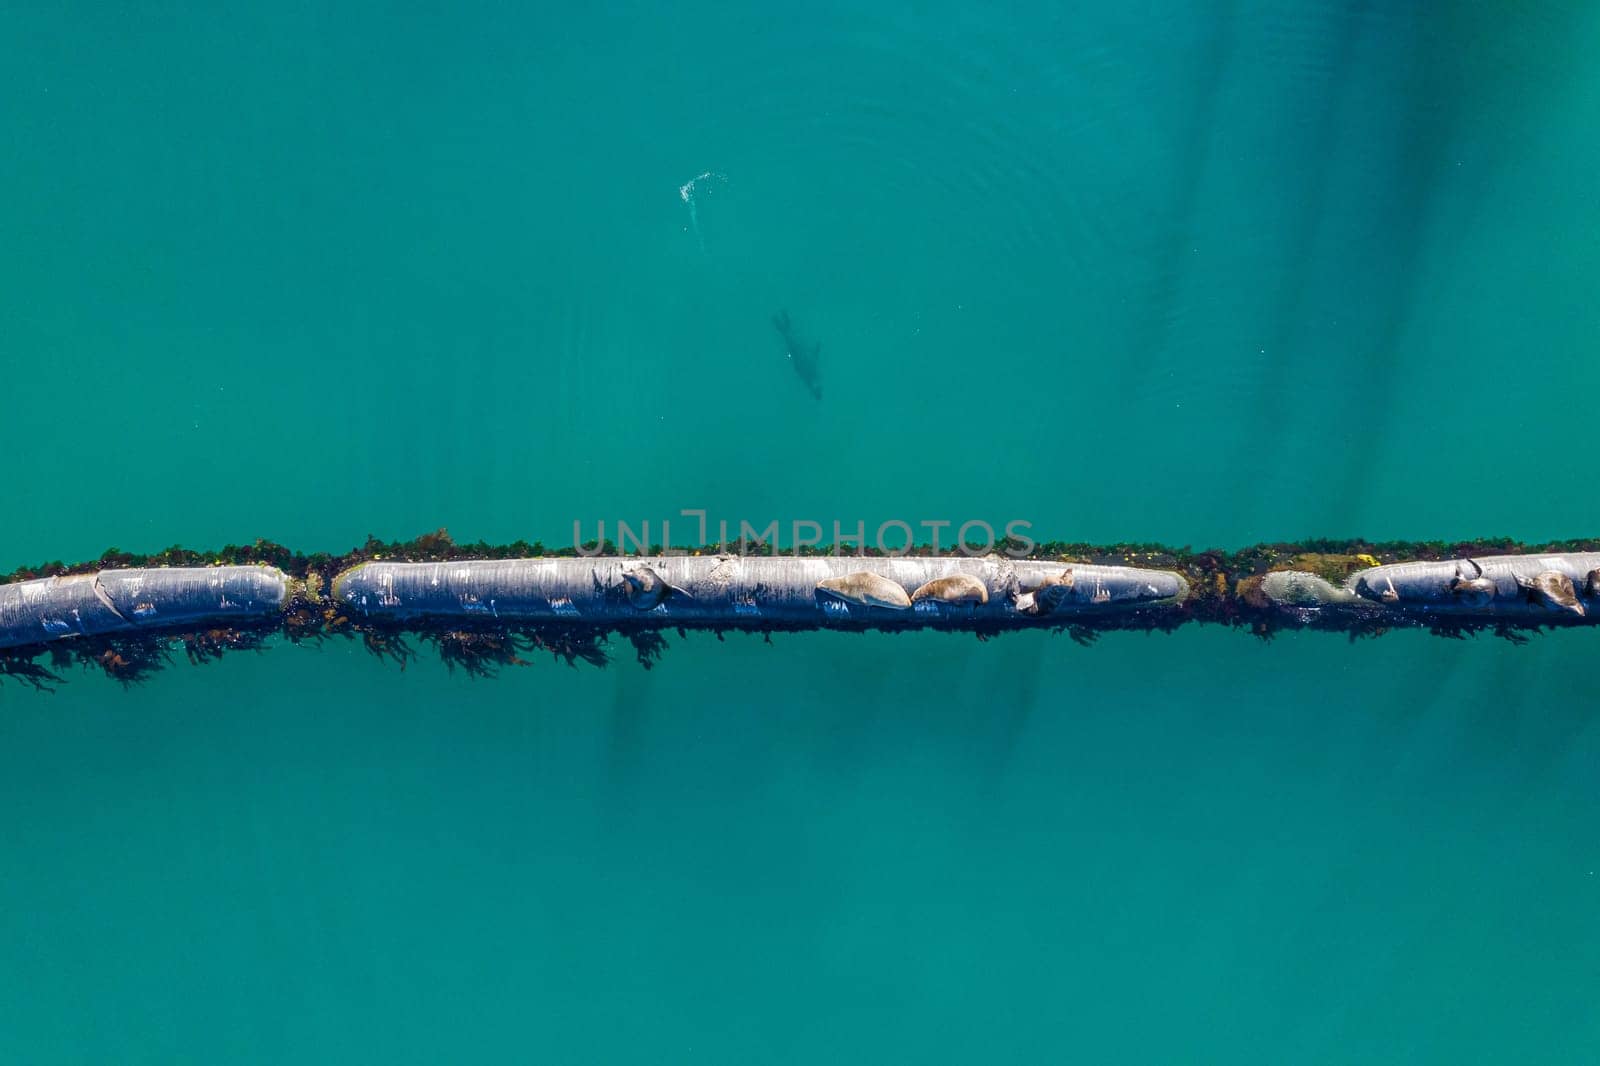 Aerial, marine and pipeline in ocean or sea, animals and seals on export pipe for fuel or gas transportation. Industrial, water and corrosion resistant steel, offshore or environmental impacts.